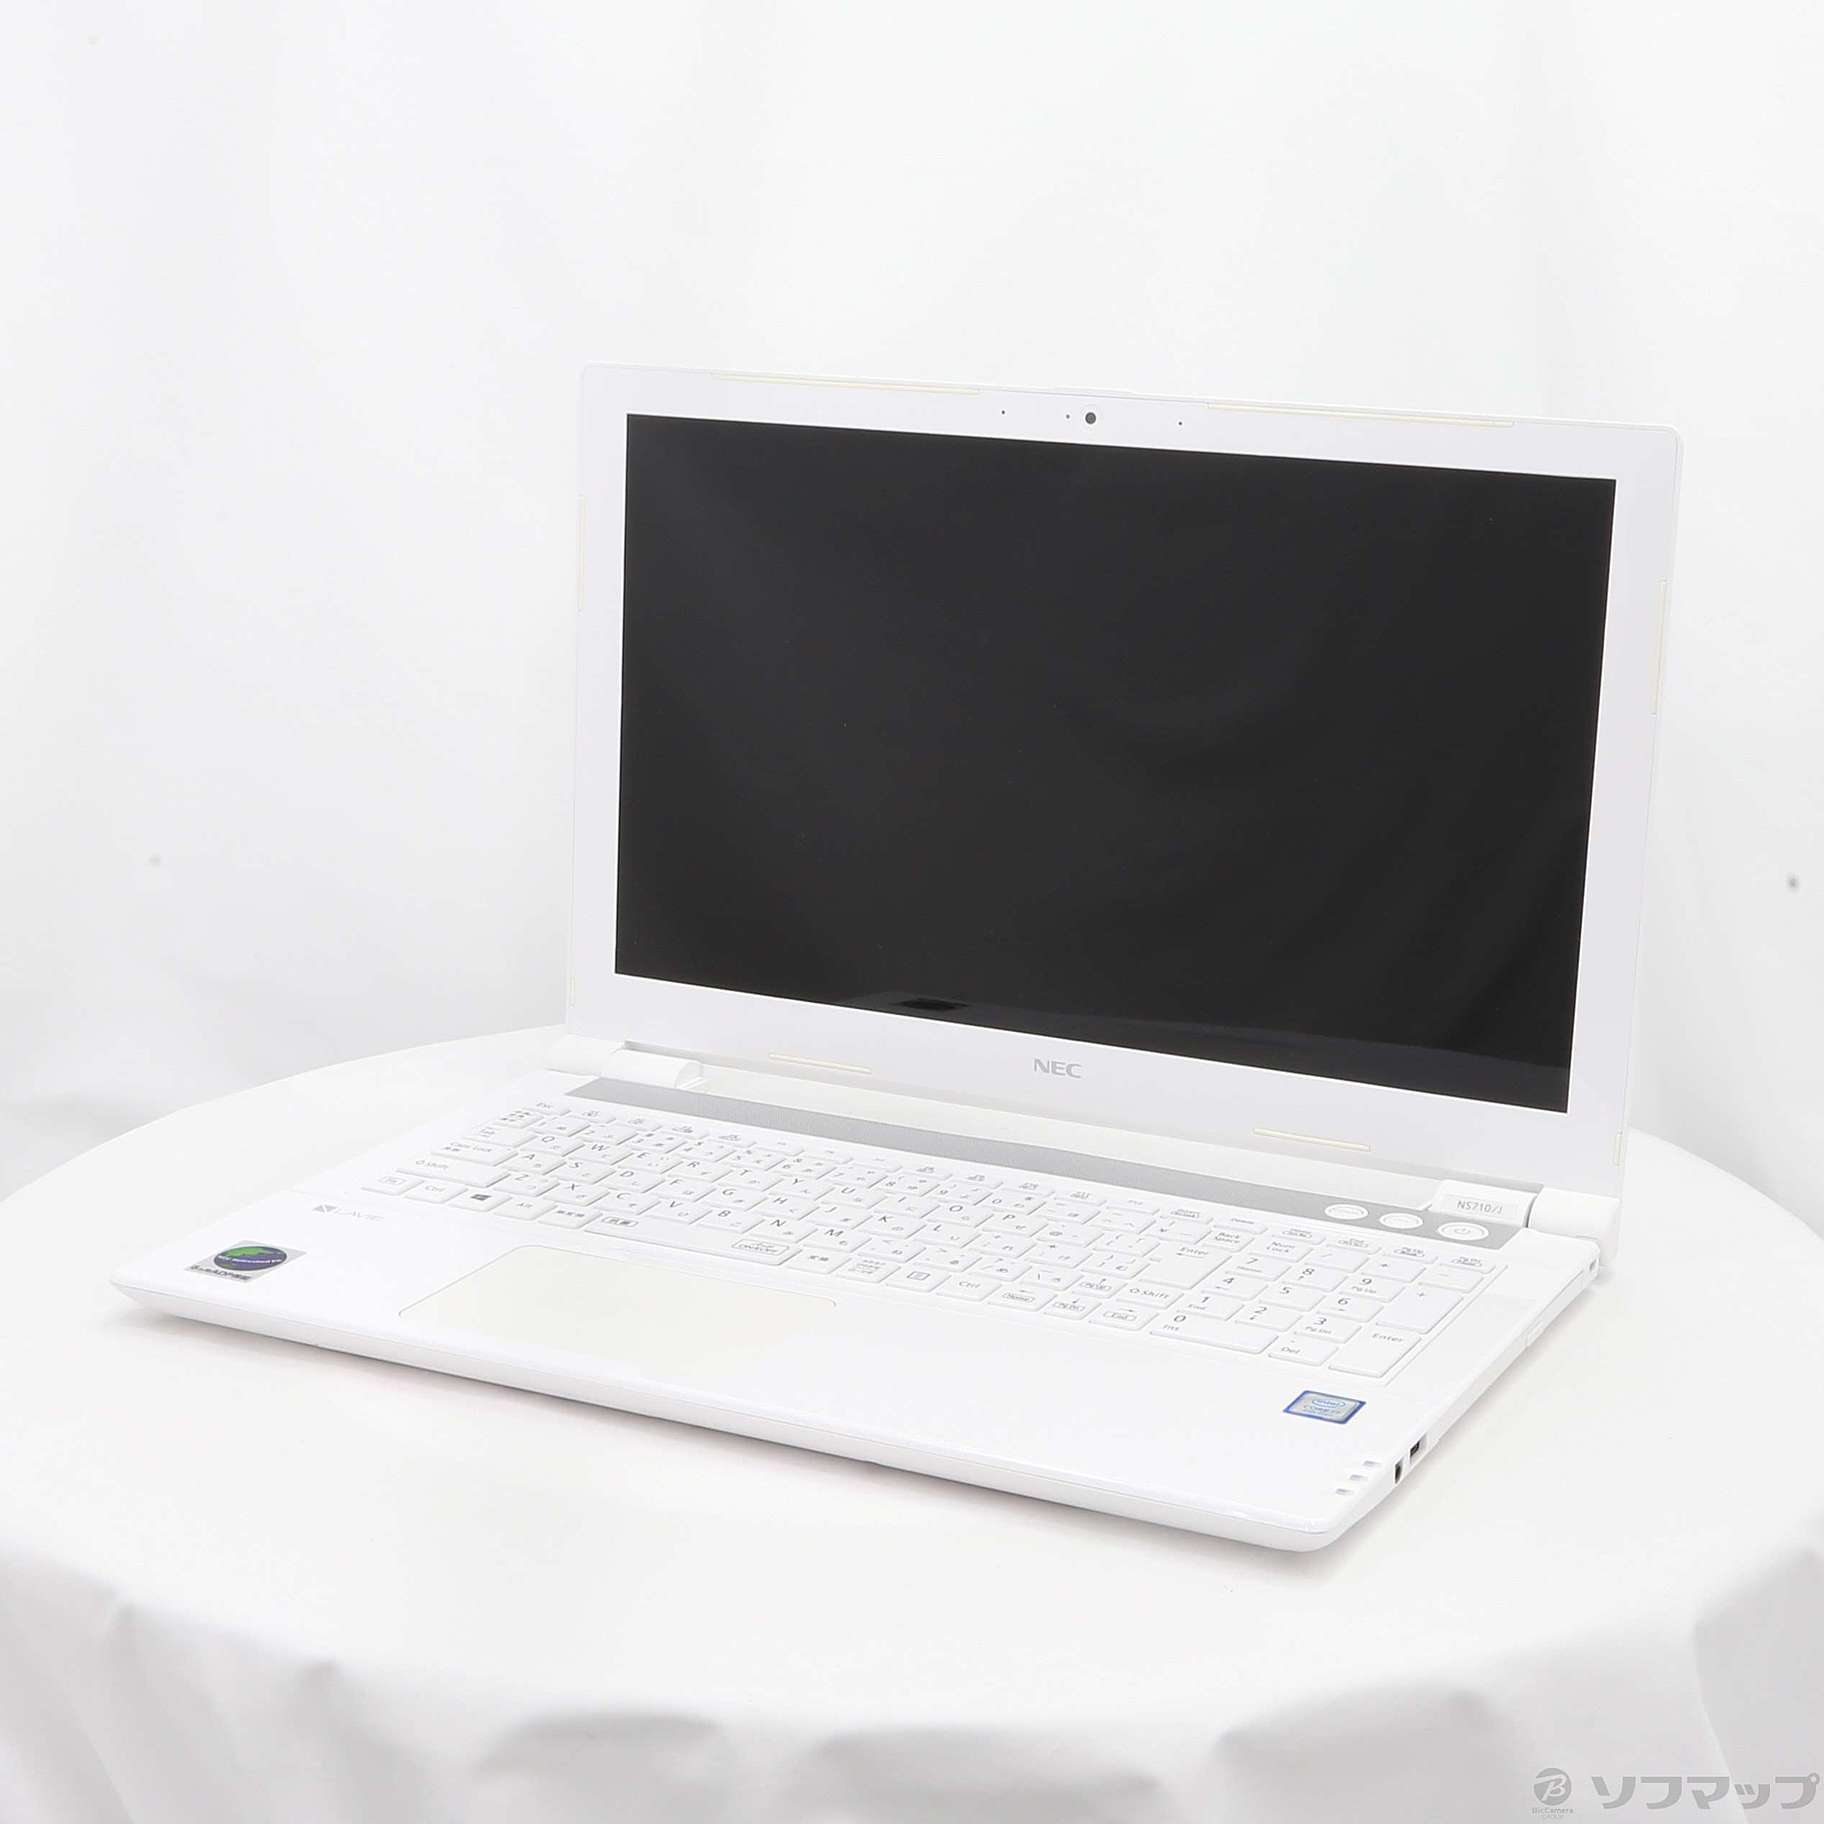 LaVie Note Standard PC-NS710JAW-J エクストラホワイト 〔NEC Refreshed PC〕 〔Windows 10〕  〔Office付〕 ≪メーカー保証あり≫ ◇01/11(水)値下げ！